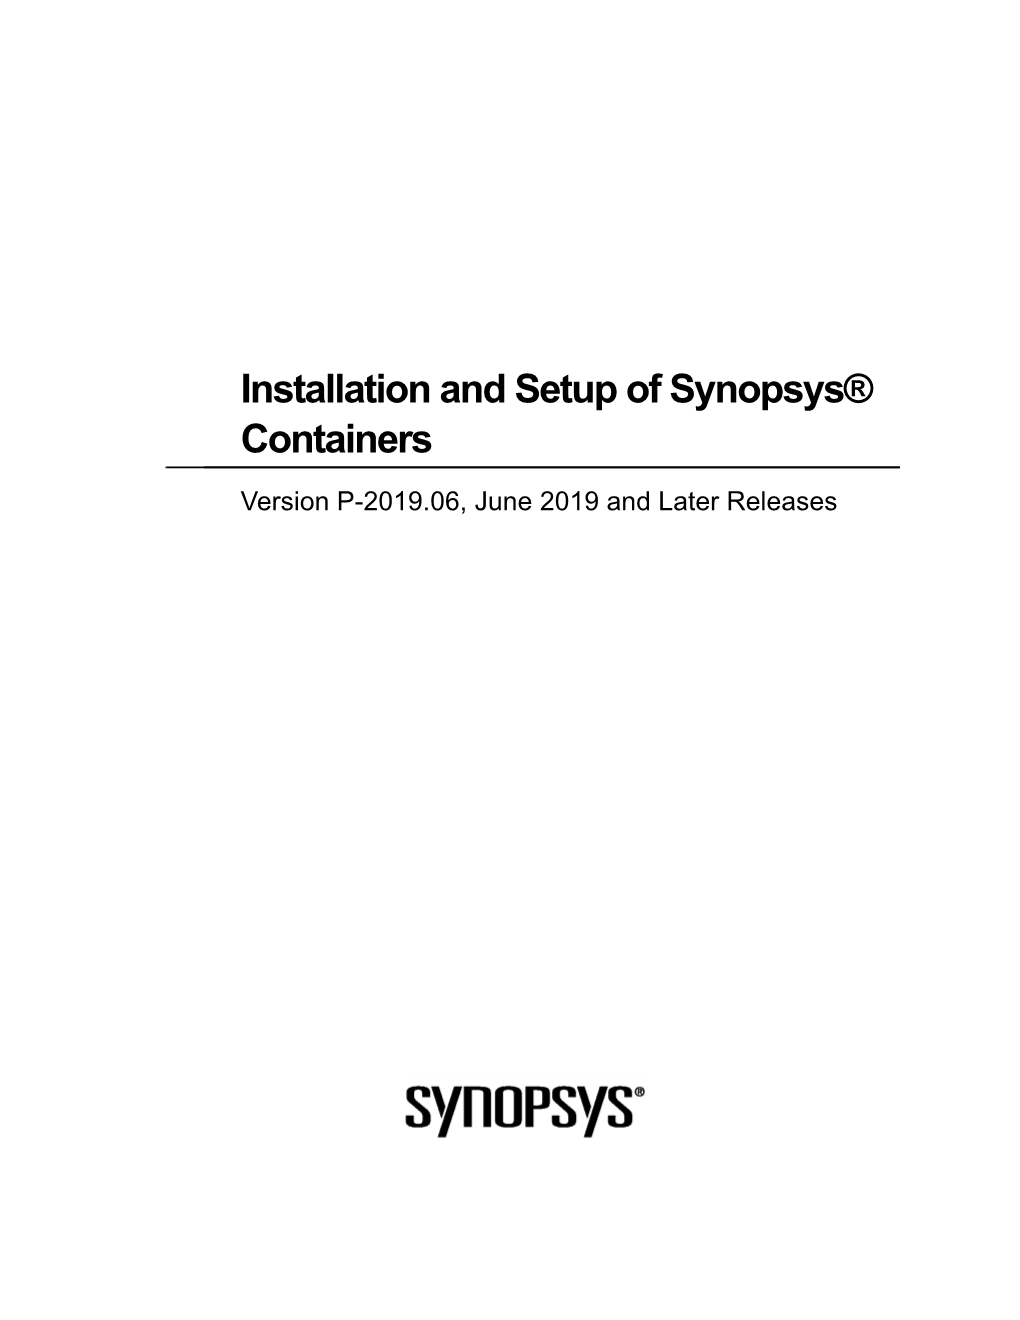 Installation and Setup of Synopsys® Containers